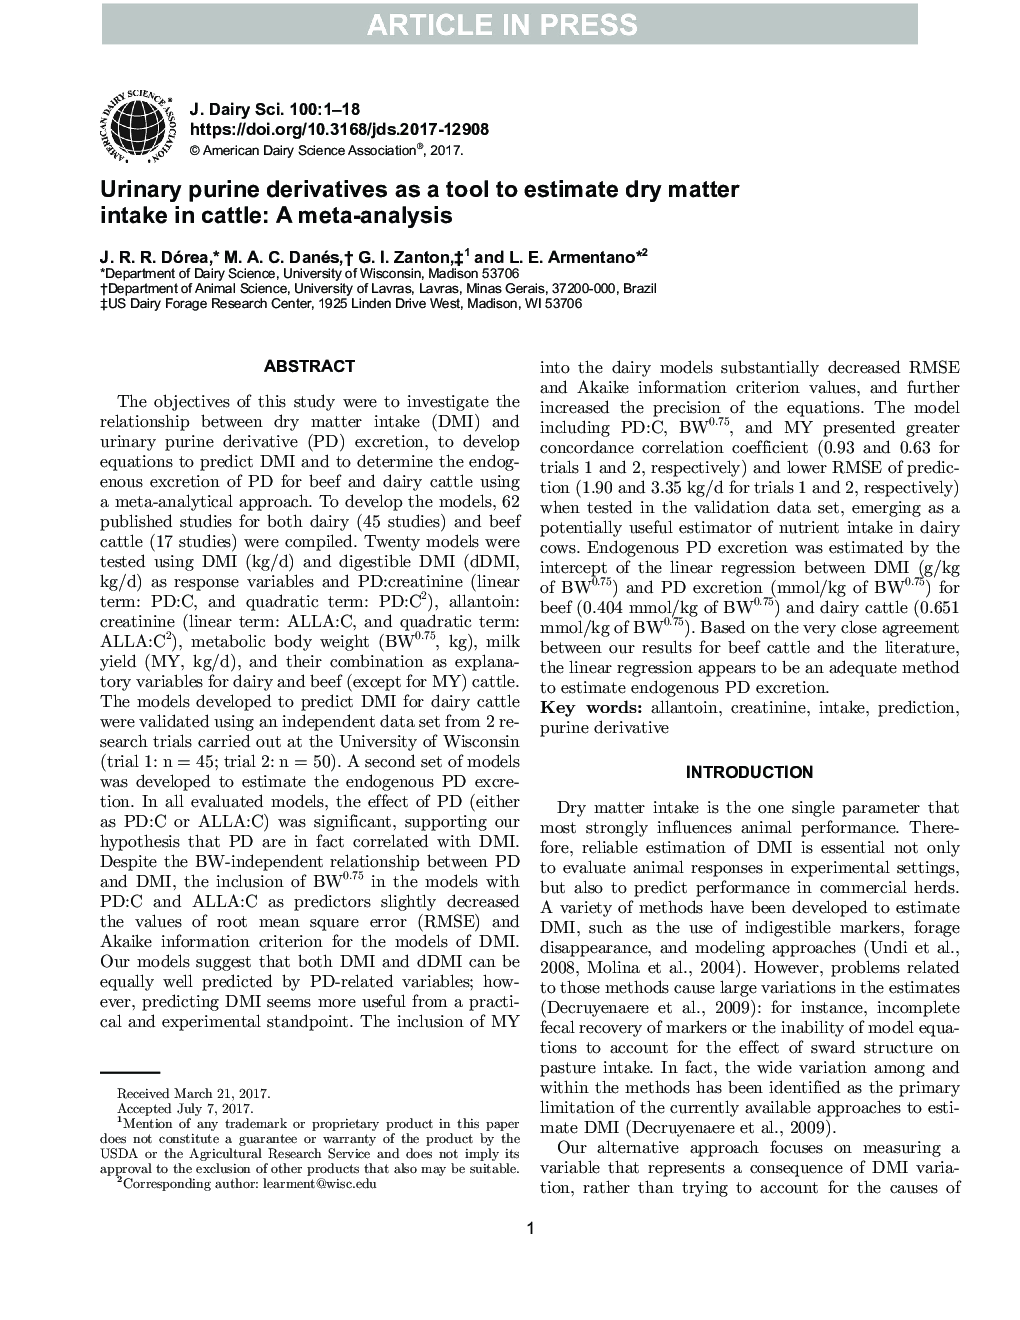 Urinary purine derivatives as a tool to estimate dry matter intake in cattle: A meta-analysis